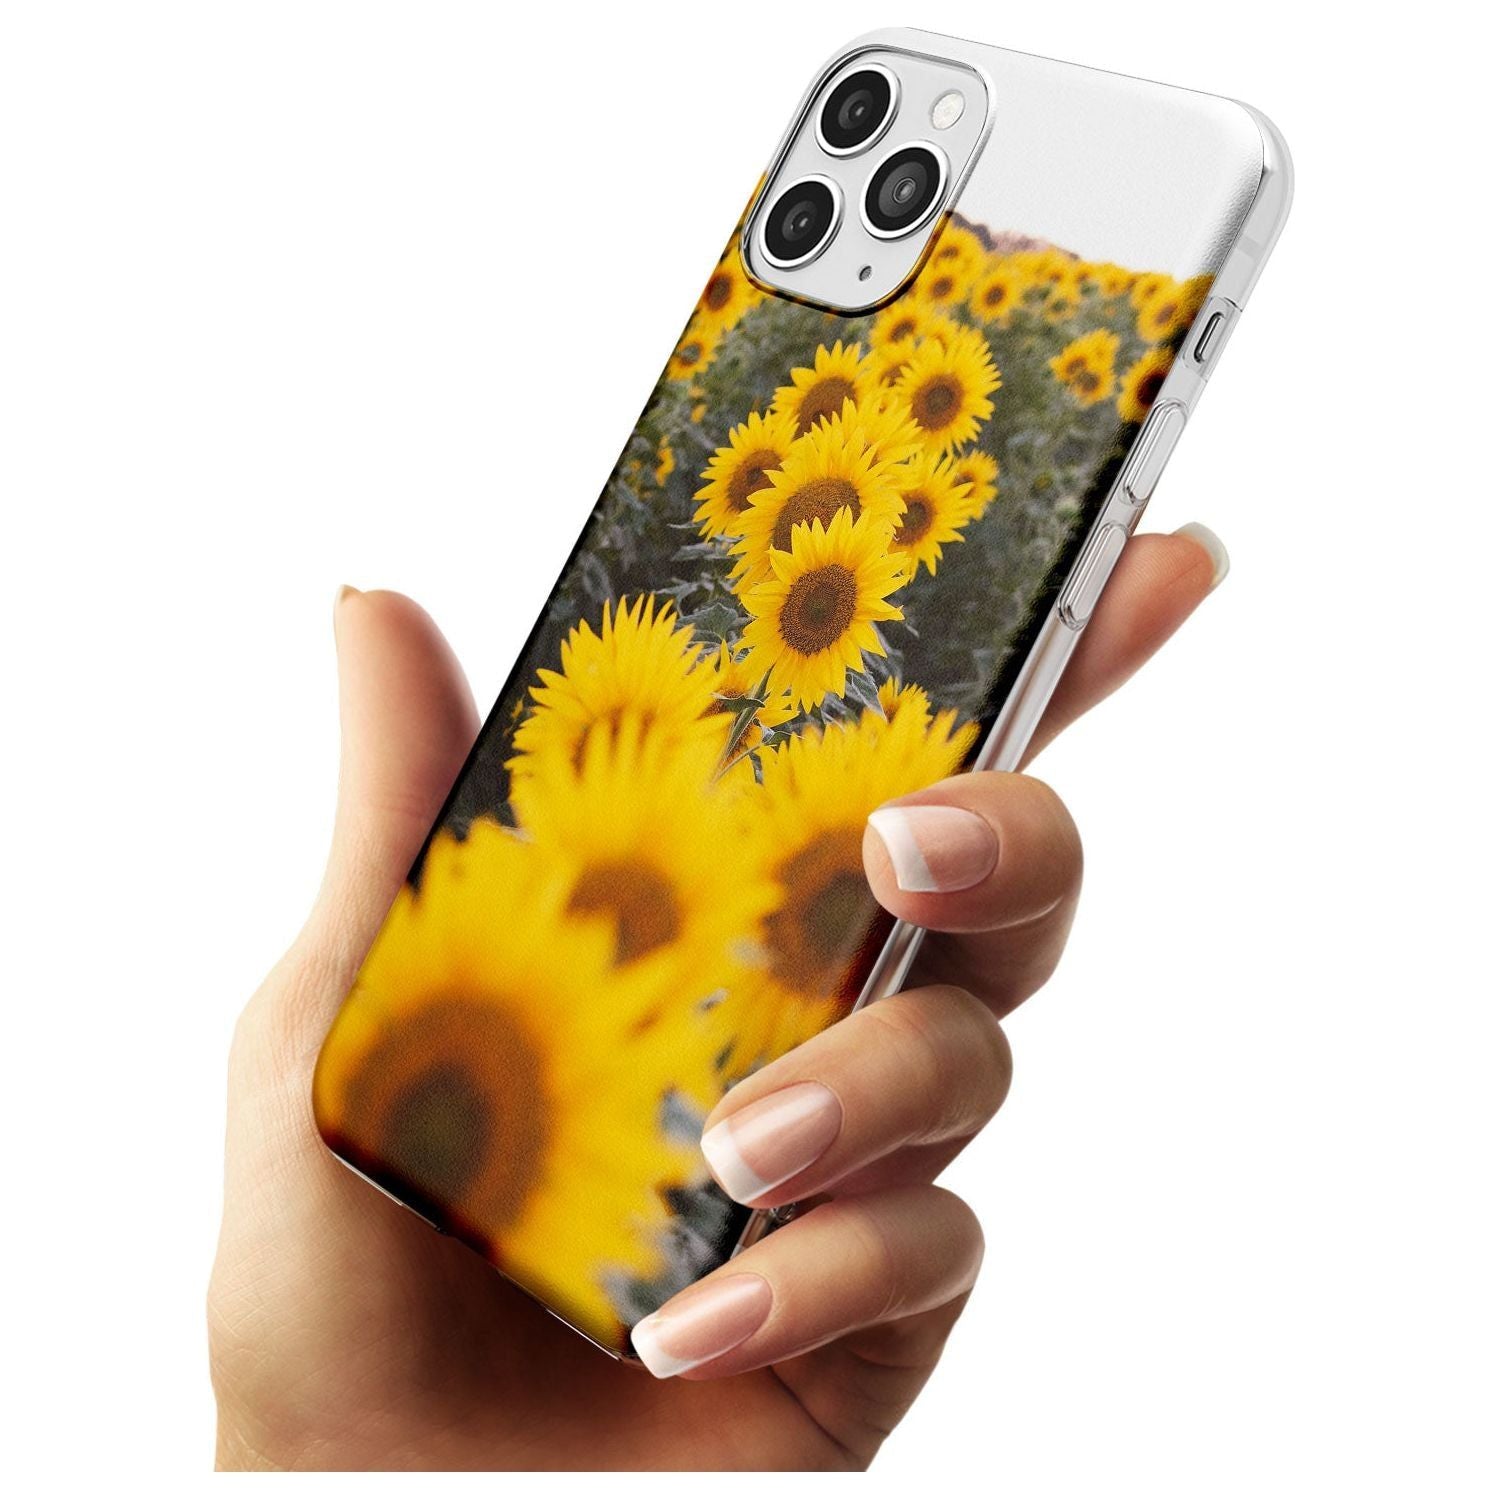 Sunflower Field Photograph Slim TPU Phone Case for iPhone 11 Pro Max